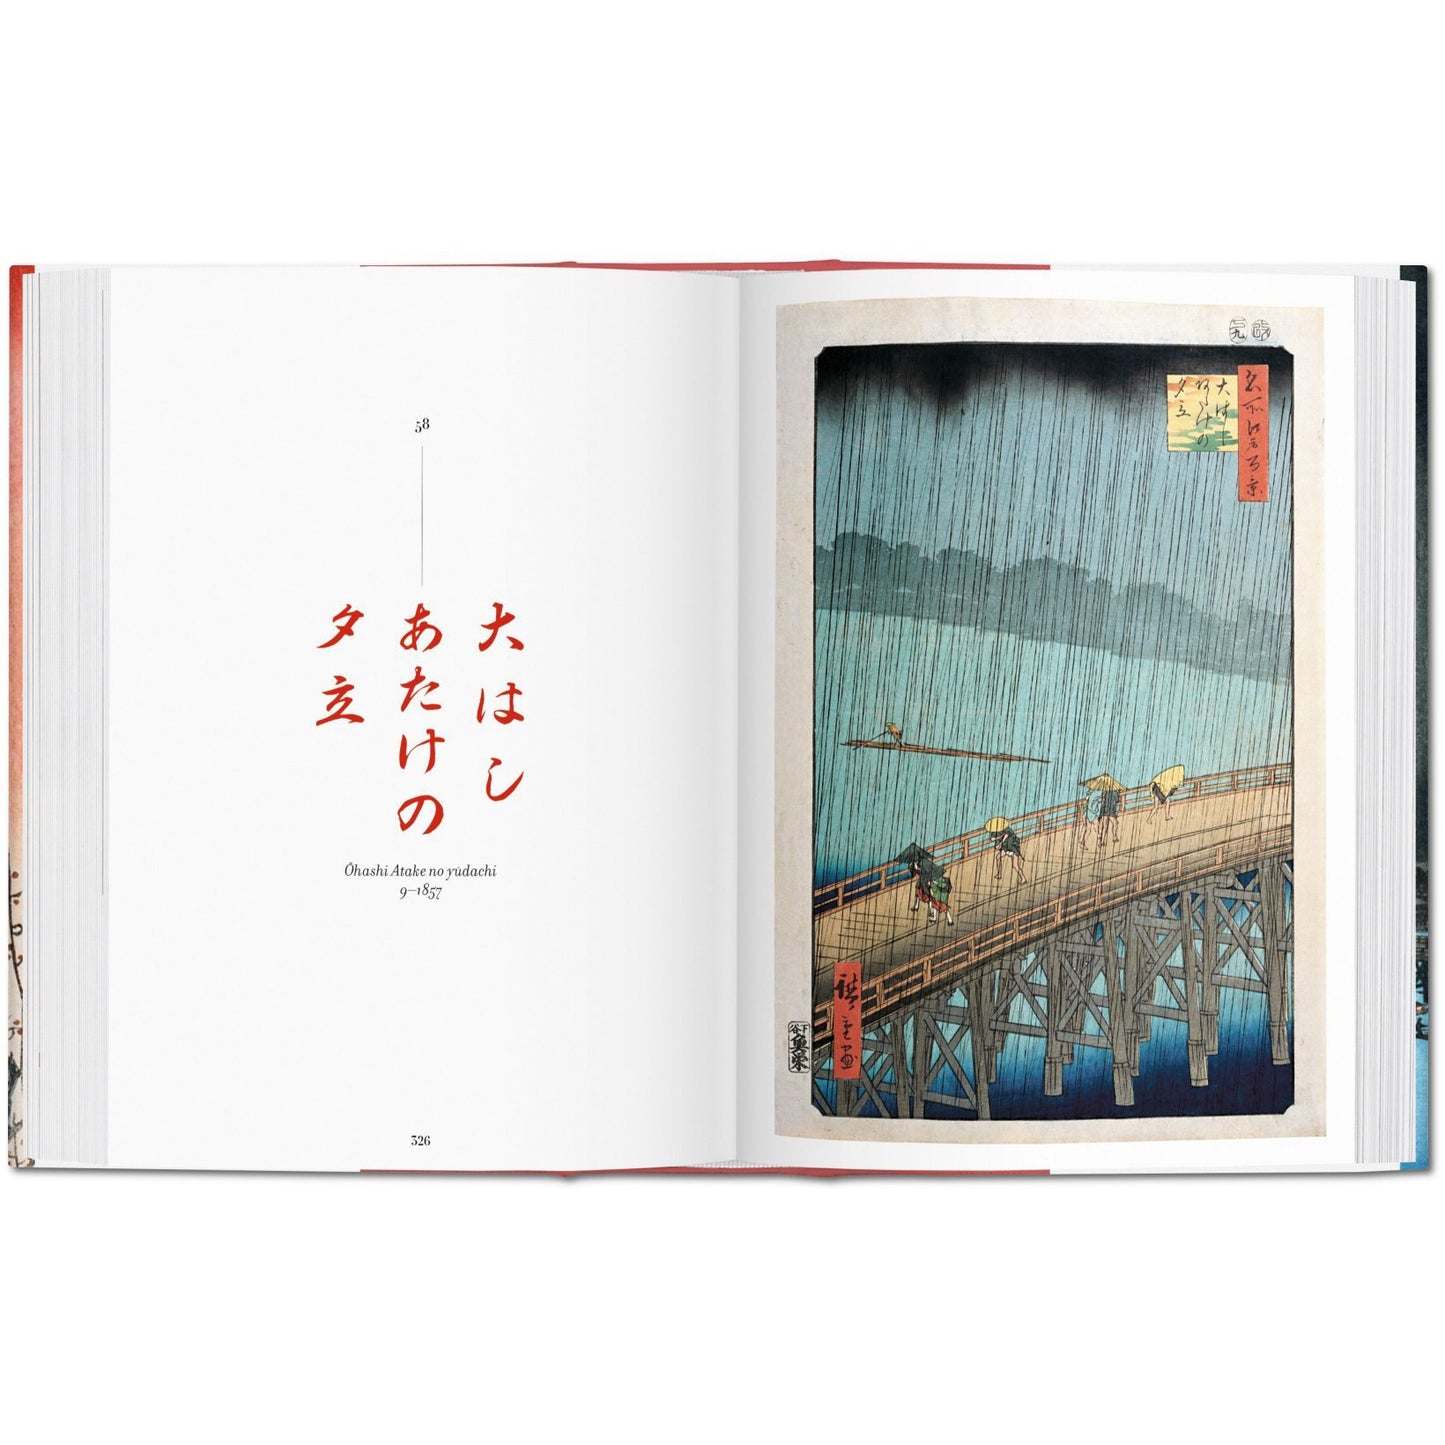 Hiroshige: One Hundred Famous Views of Edo, The Complete Plates